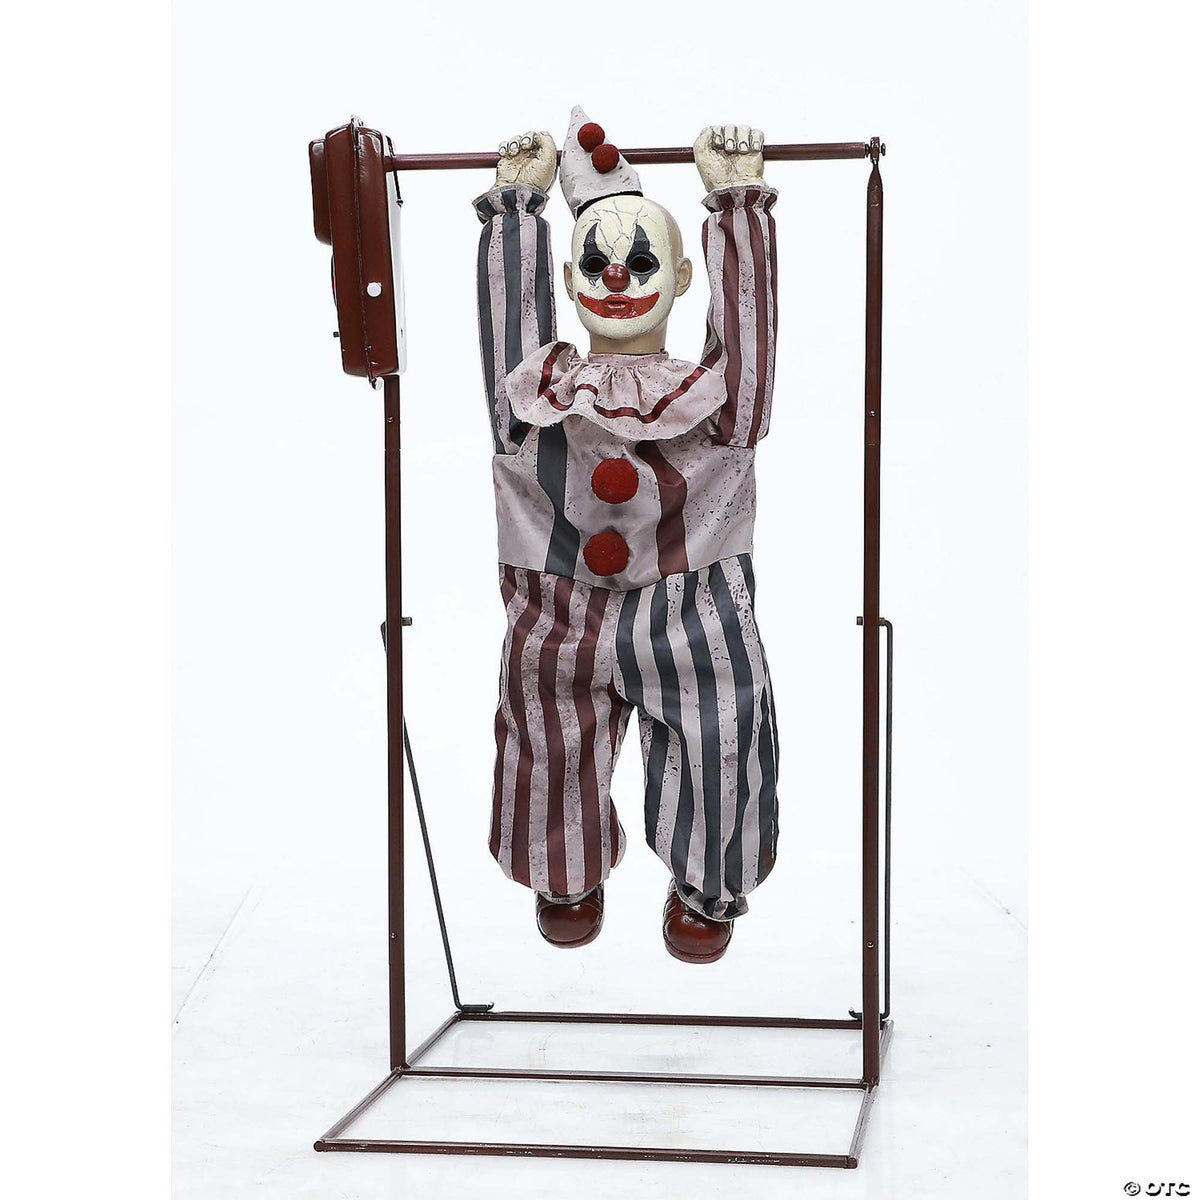 MORRIS COSTUMES Halloween Animated Tumbling Clown Doll, 36 Inches, 1 Count